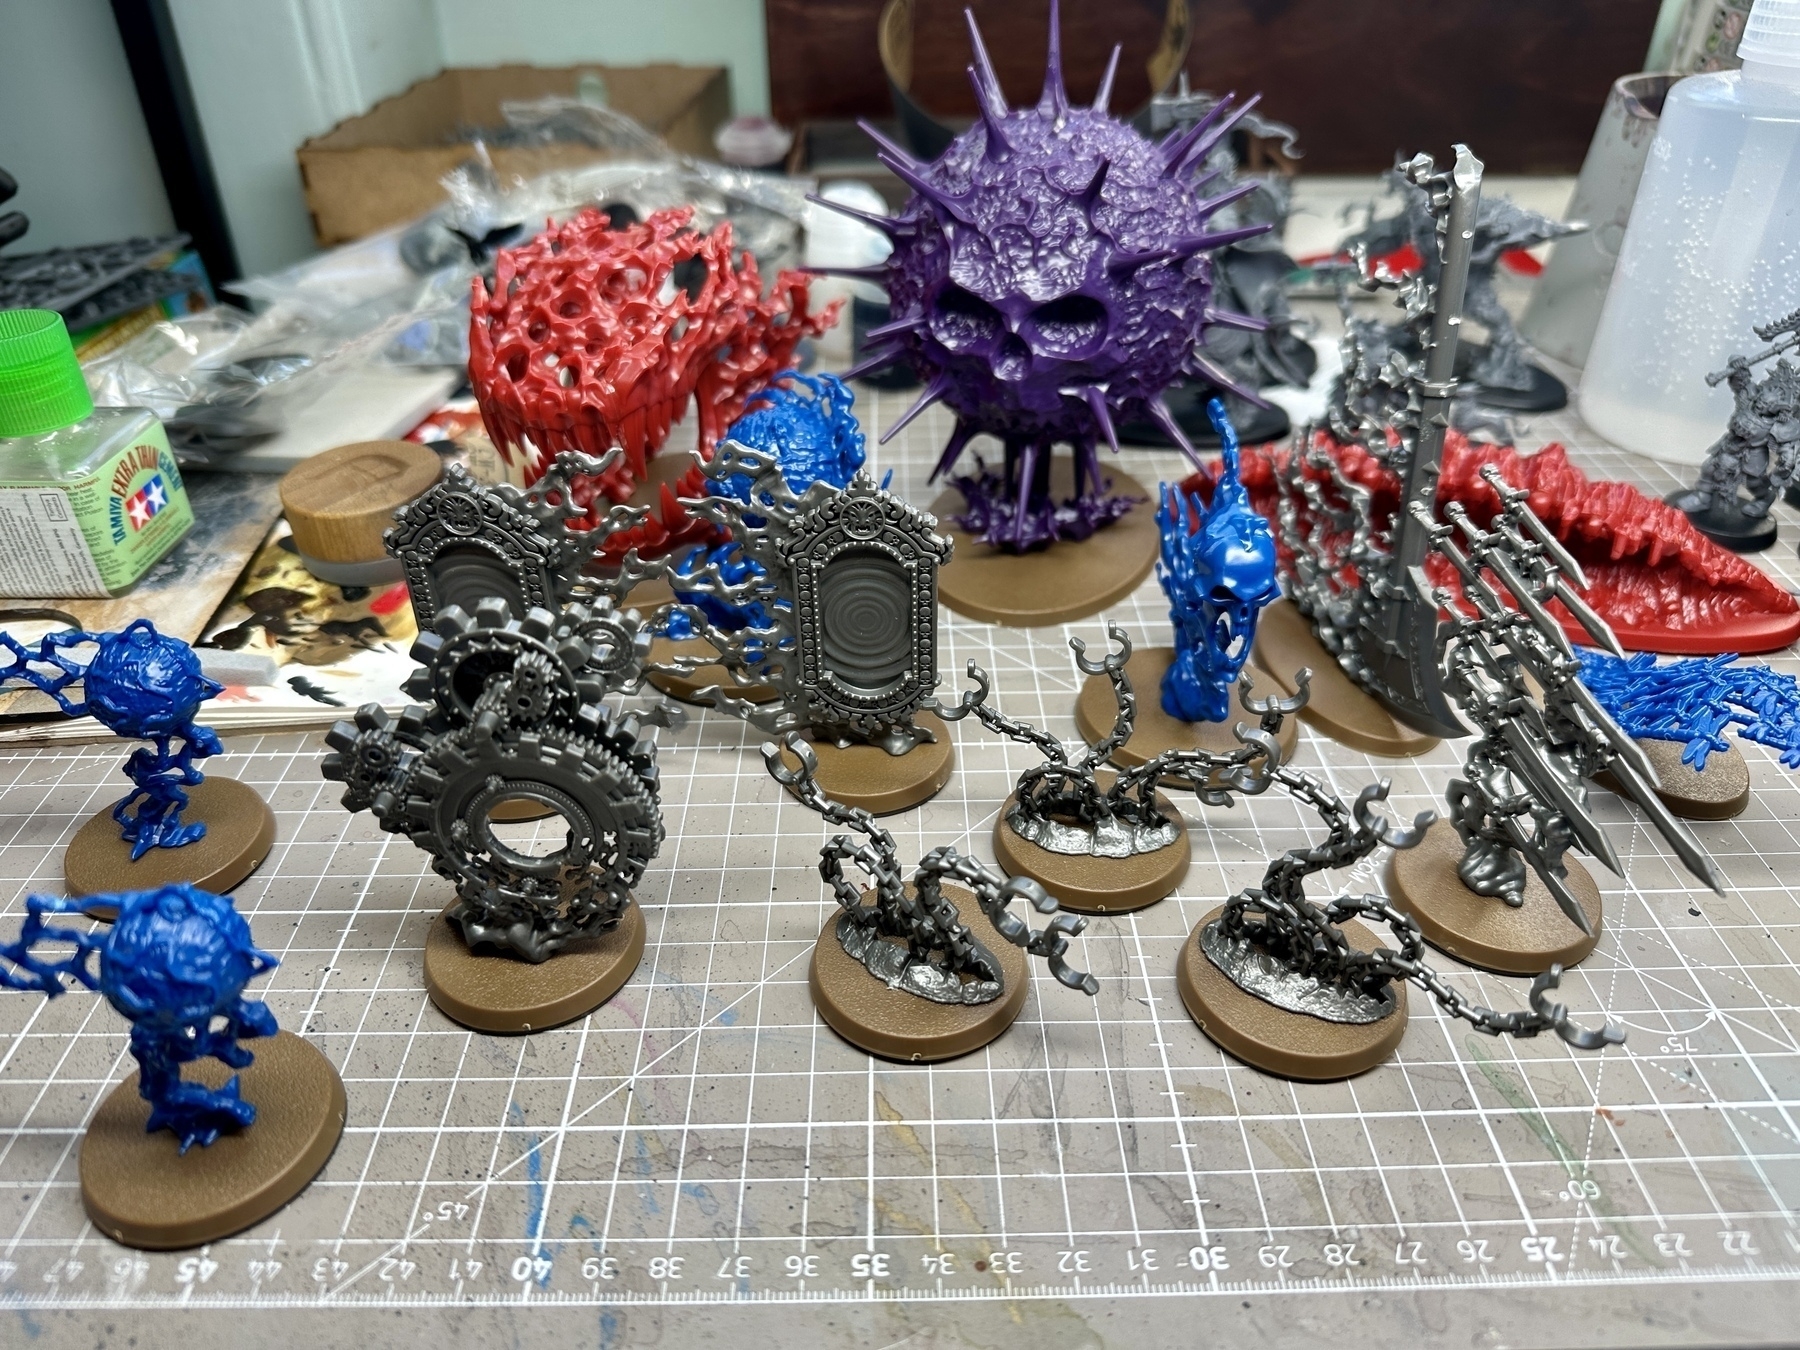 Endless Spell models, by Games Workshop, unpainted, on a messy desk. They are in a variety of coloured plastics